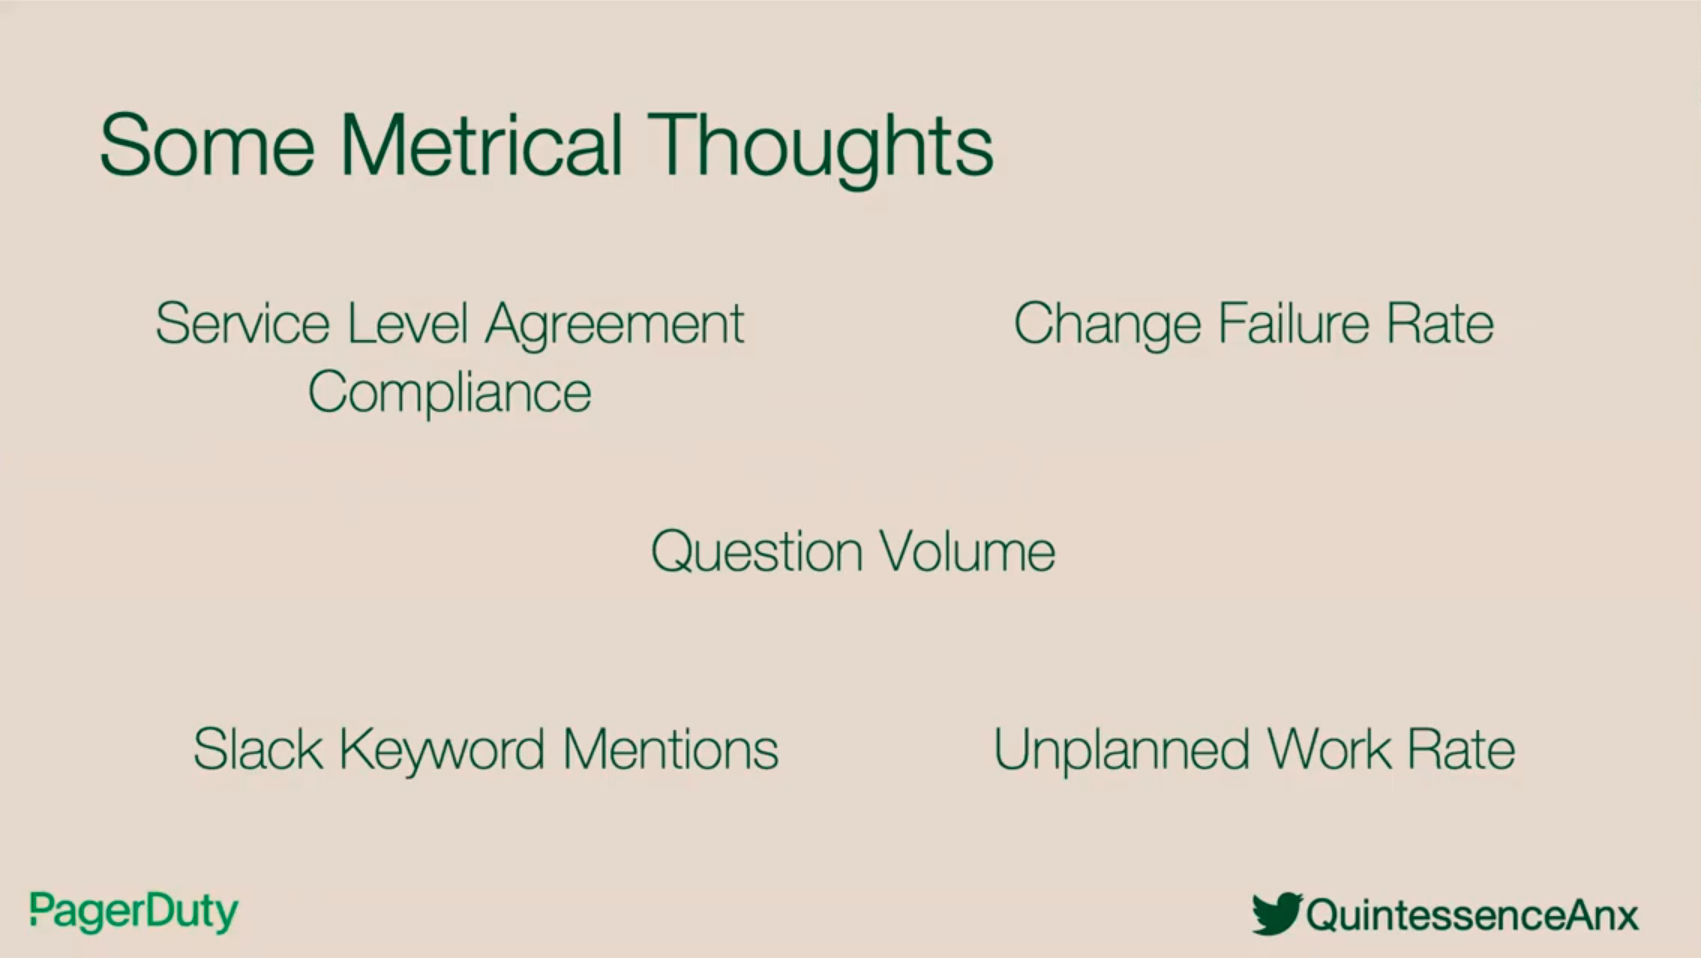 Some example metrics to track: SLA compliance, question volume, change failure rate, unplanned work rate